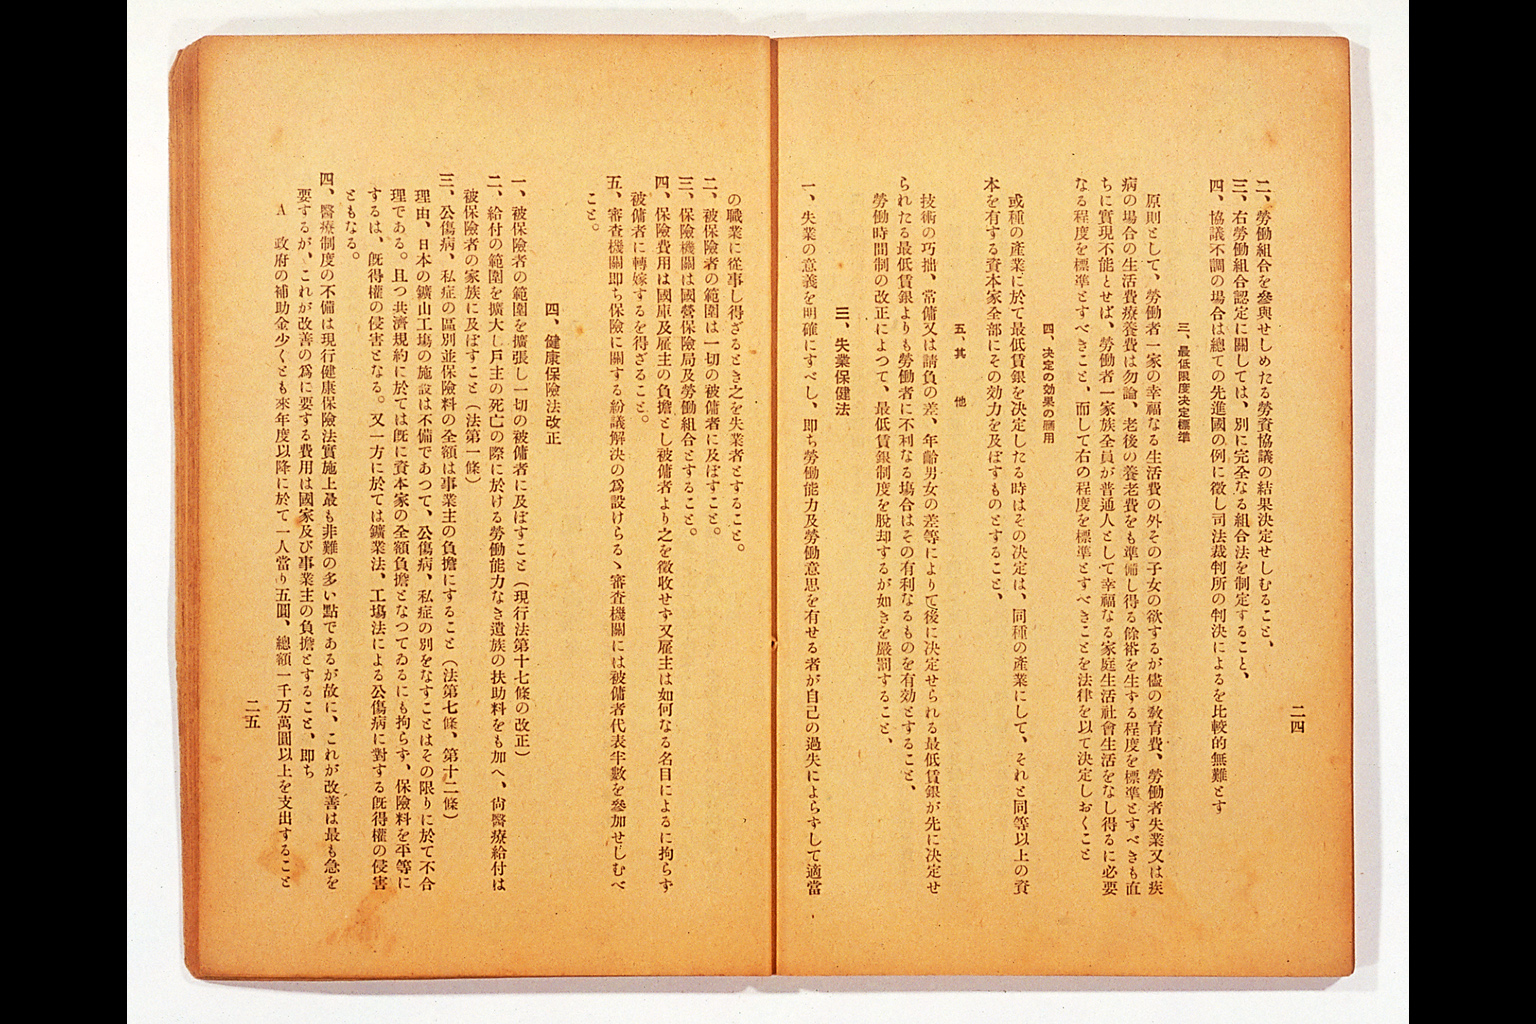 Measure And Report Of The Japan Ronoto Party Headquarters Presented At Its First National Convention Larger 58 76 Modern Japan In Archives